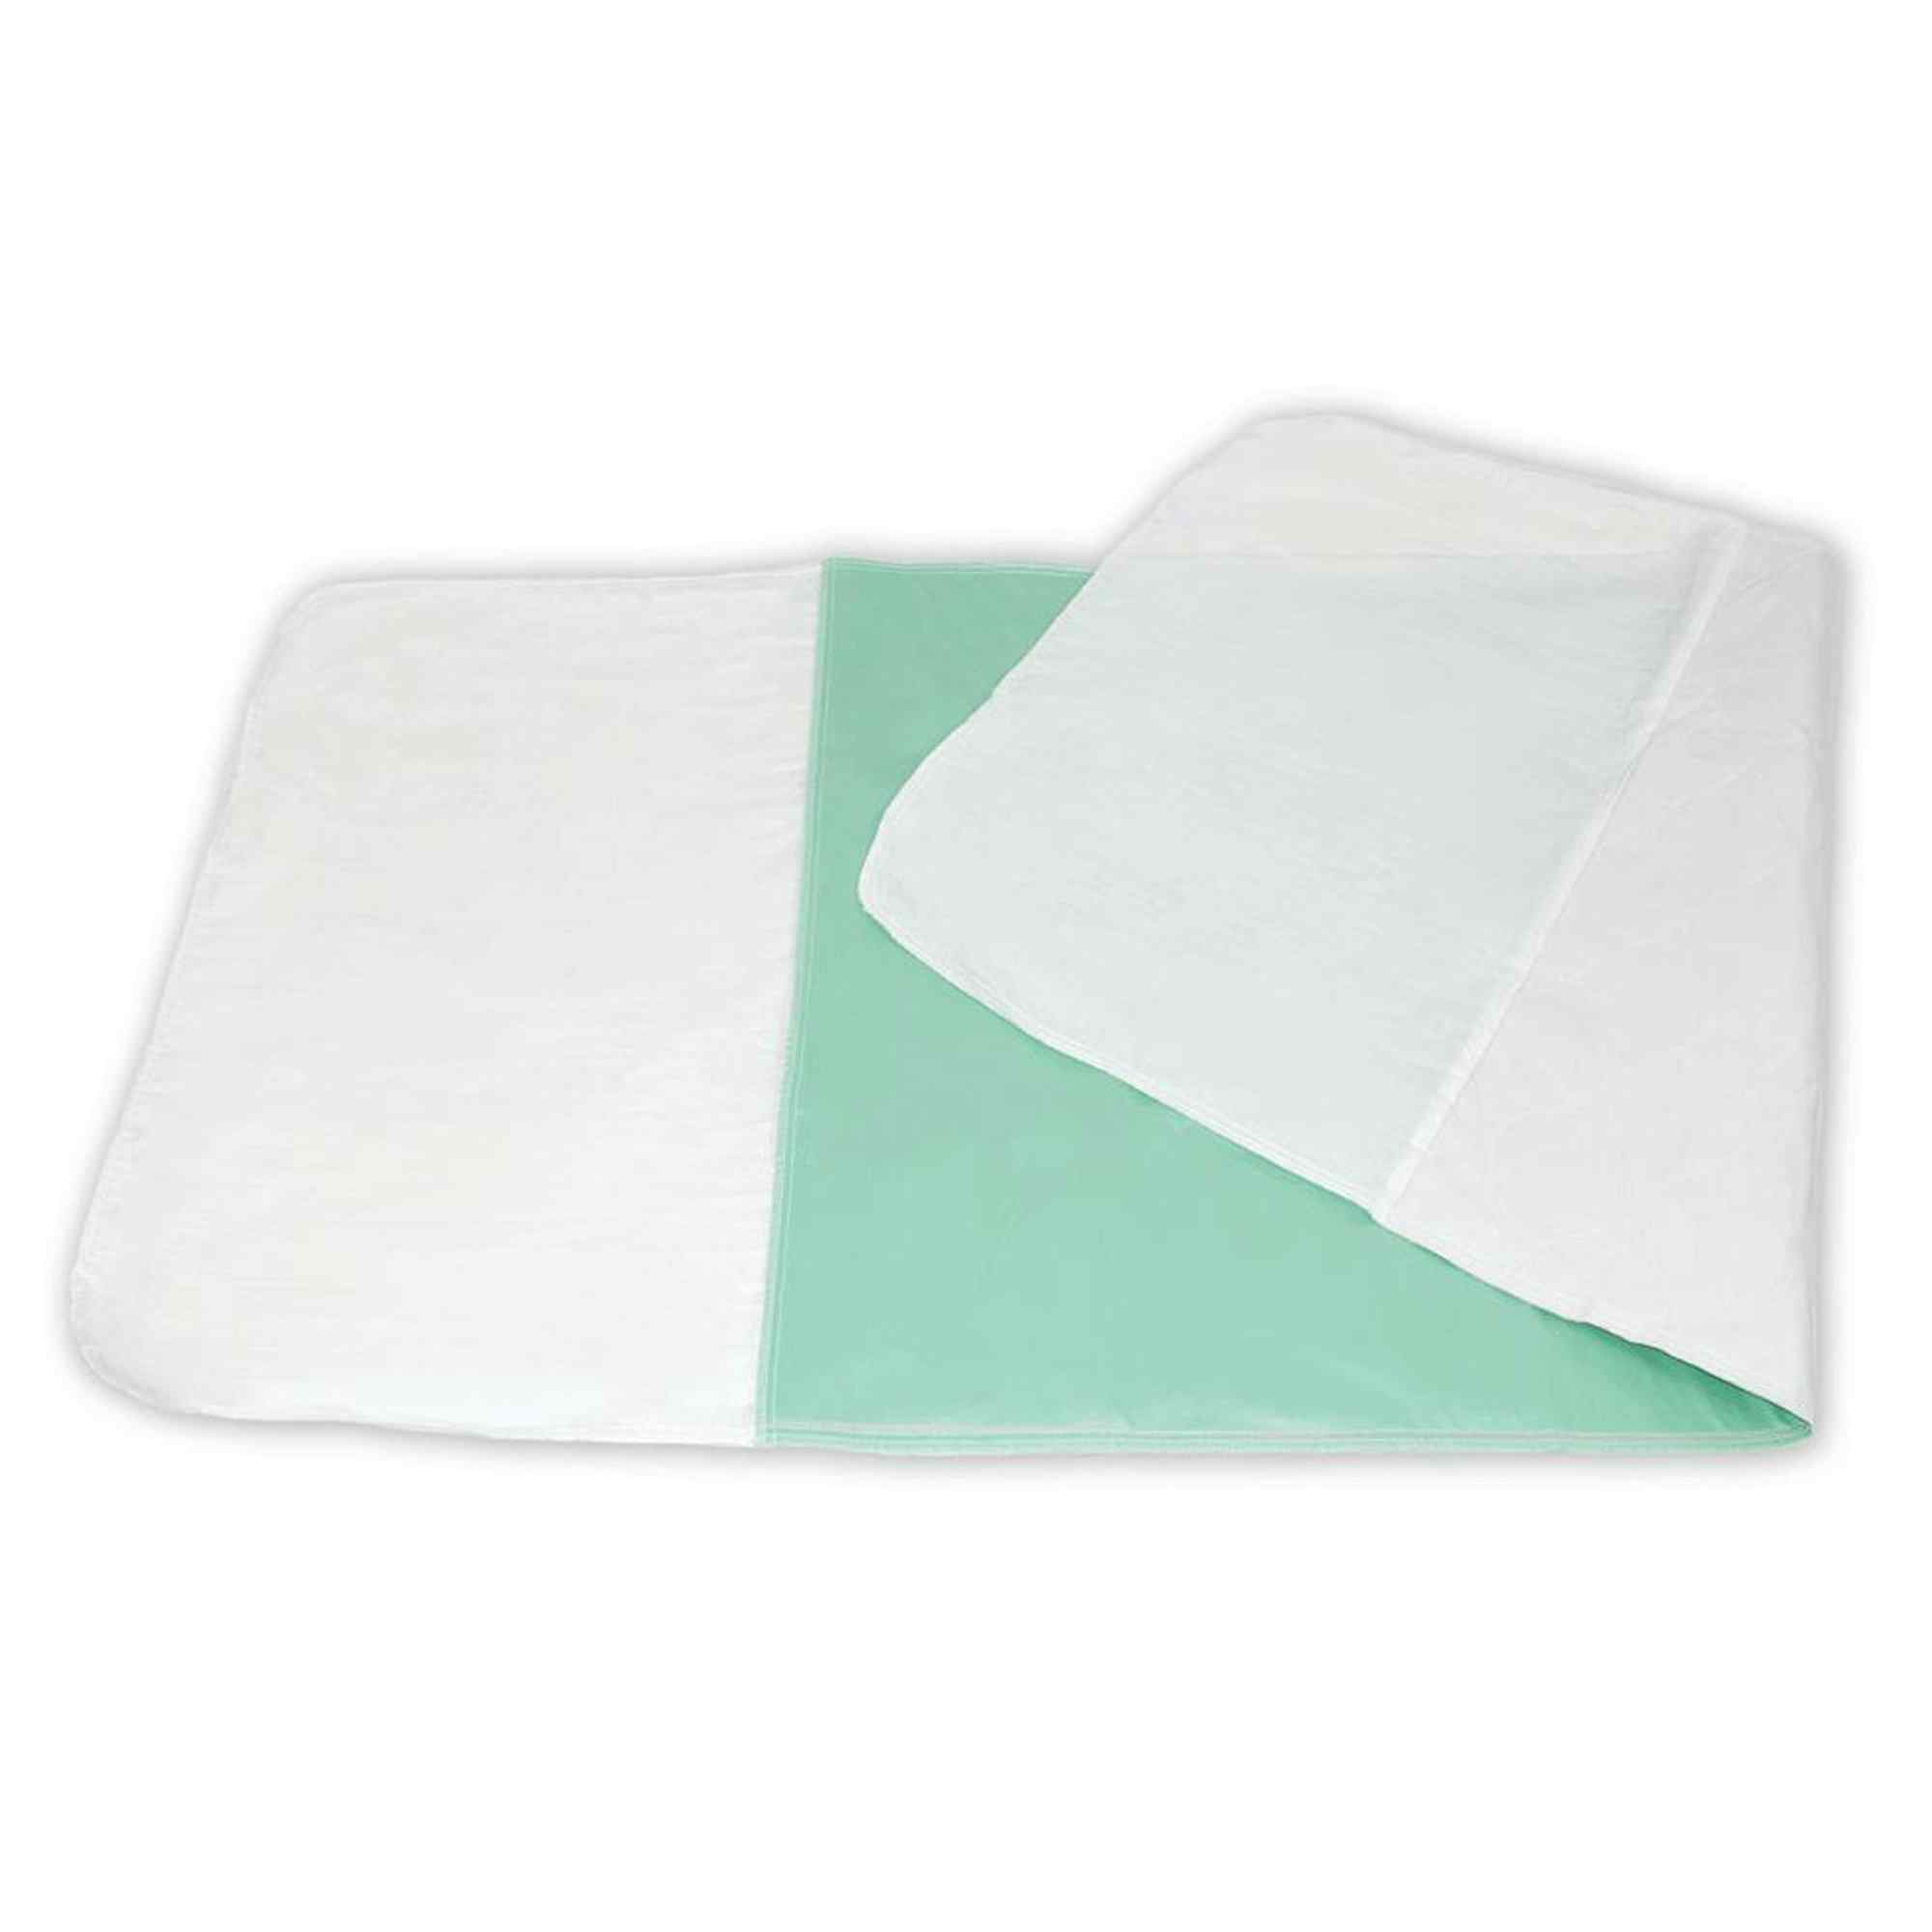 Abena Reusable Underpad with Tuckable Flaps, Moderate Absorbency, 2592, 30 X 72" - Case of 10